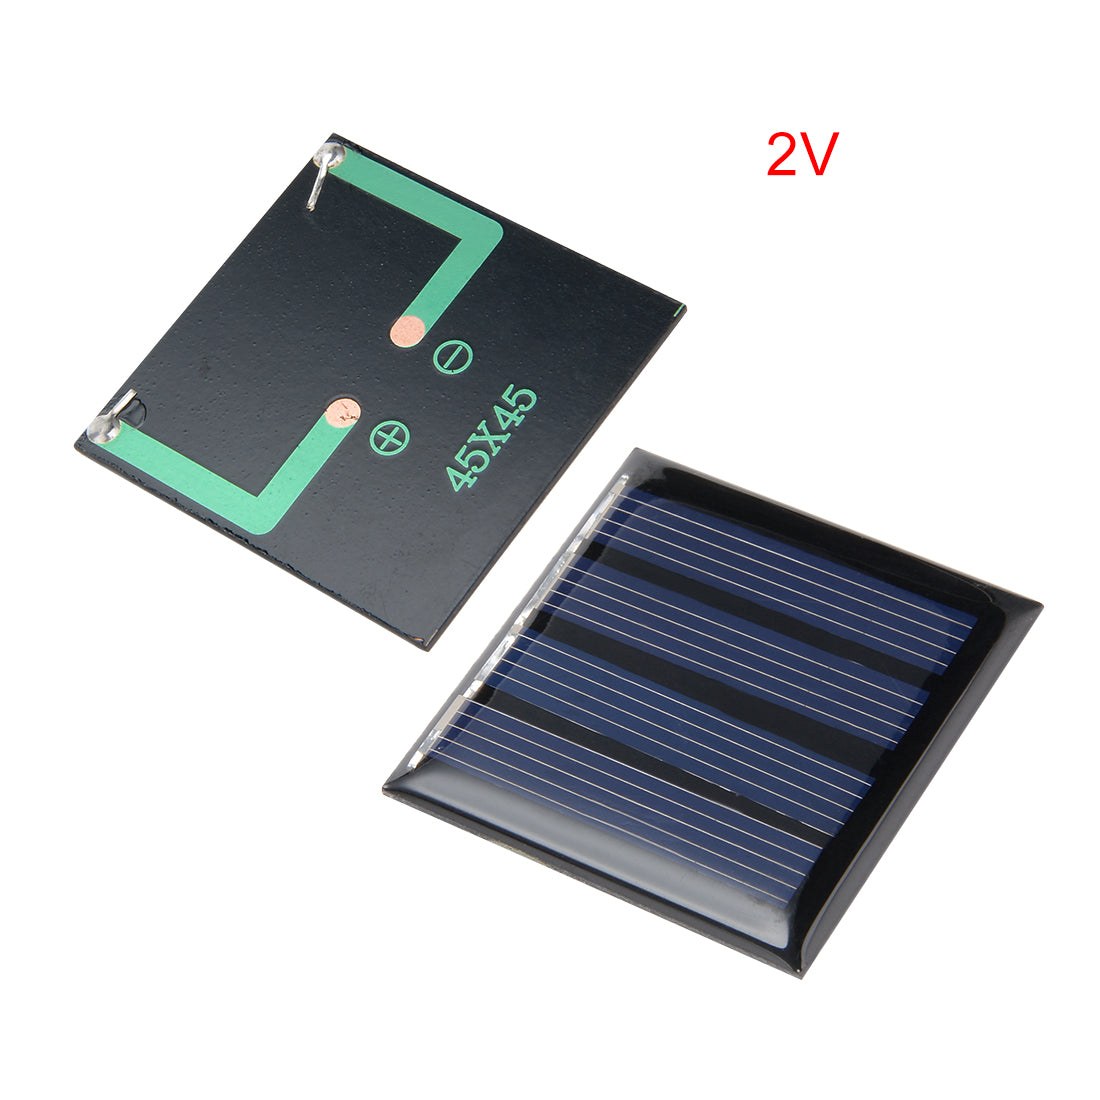 uxcell Uxcell 5Pcs 2V 50mA Poly Mini Solar Cell Panel Module DIY for Phone Light Toys Charger 45mm x 45mm